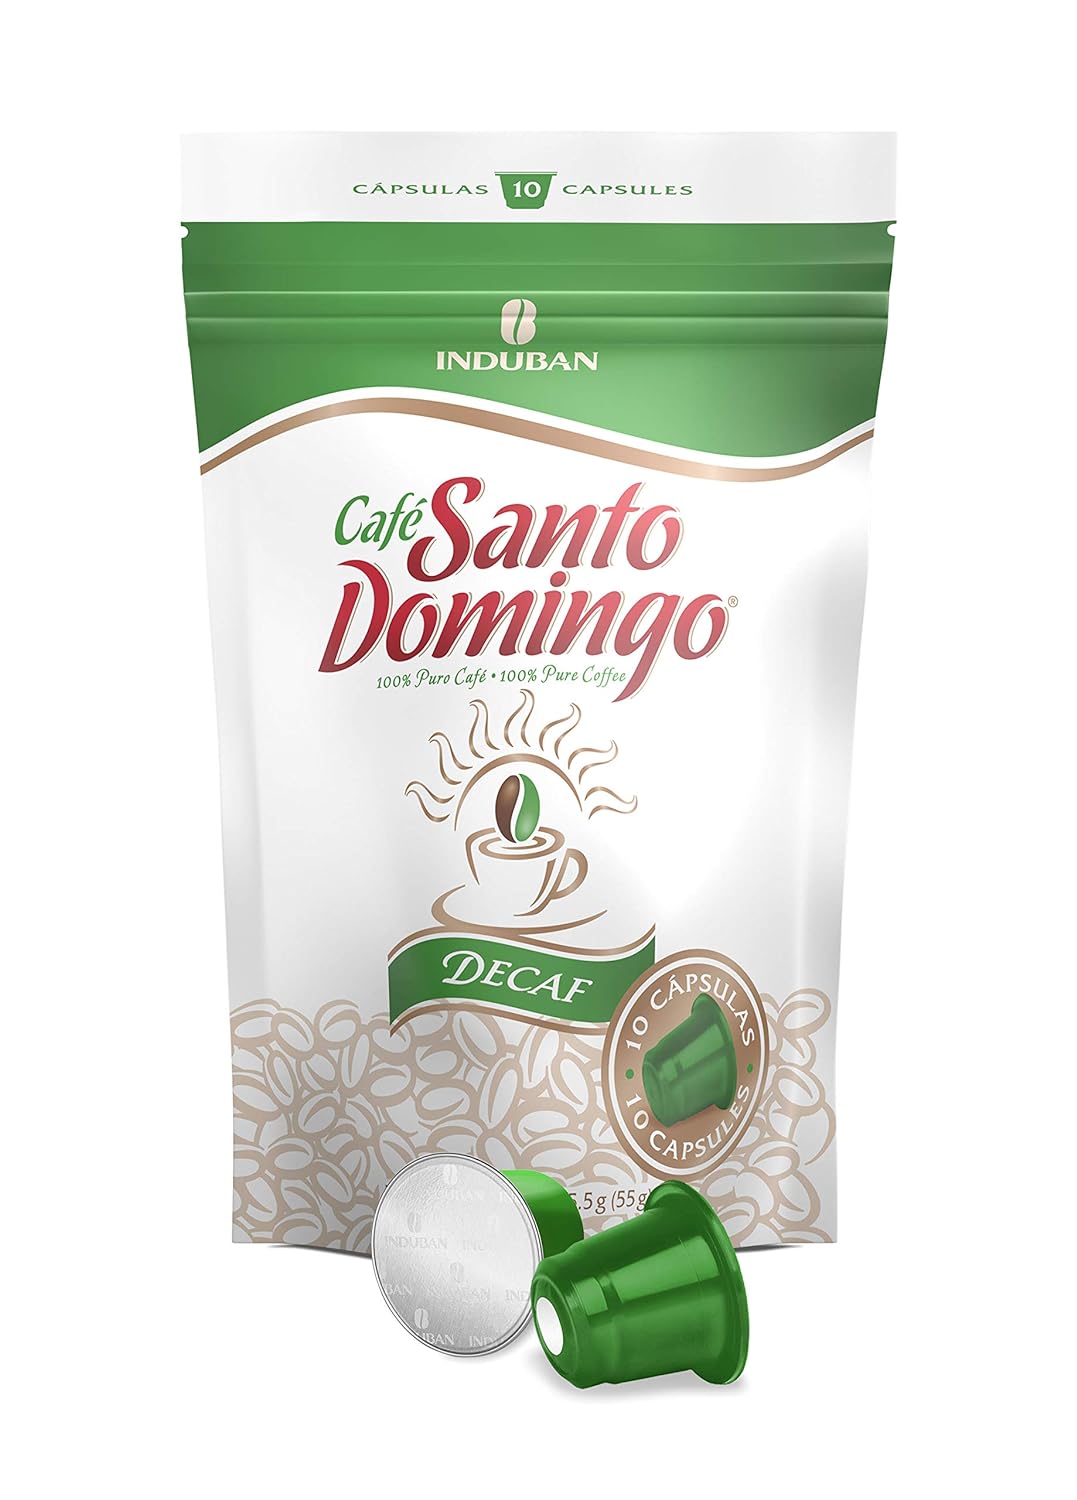 Santo Domingo Coffee Decaf Capsules - Compatible with Nespresso Original Brewers - Product from the Dominican Republic (10 Count)